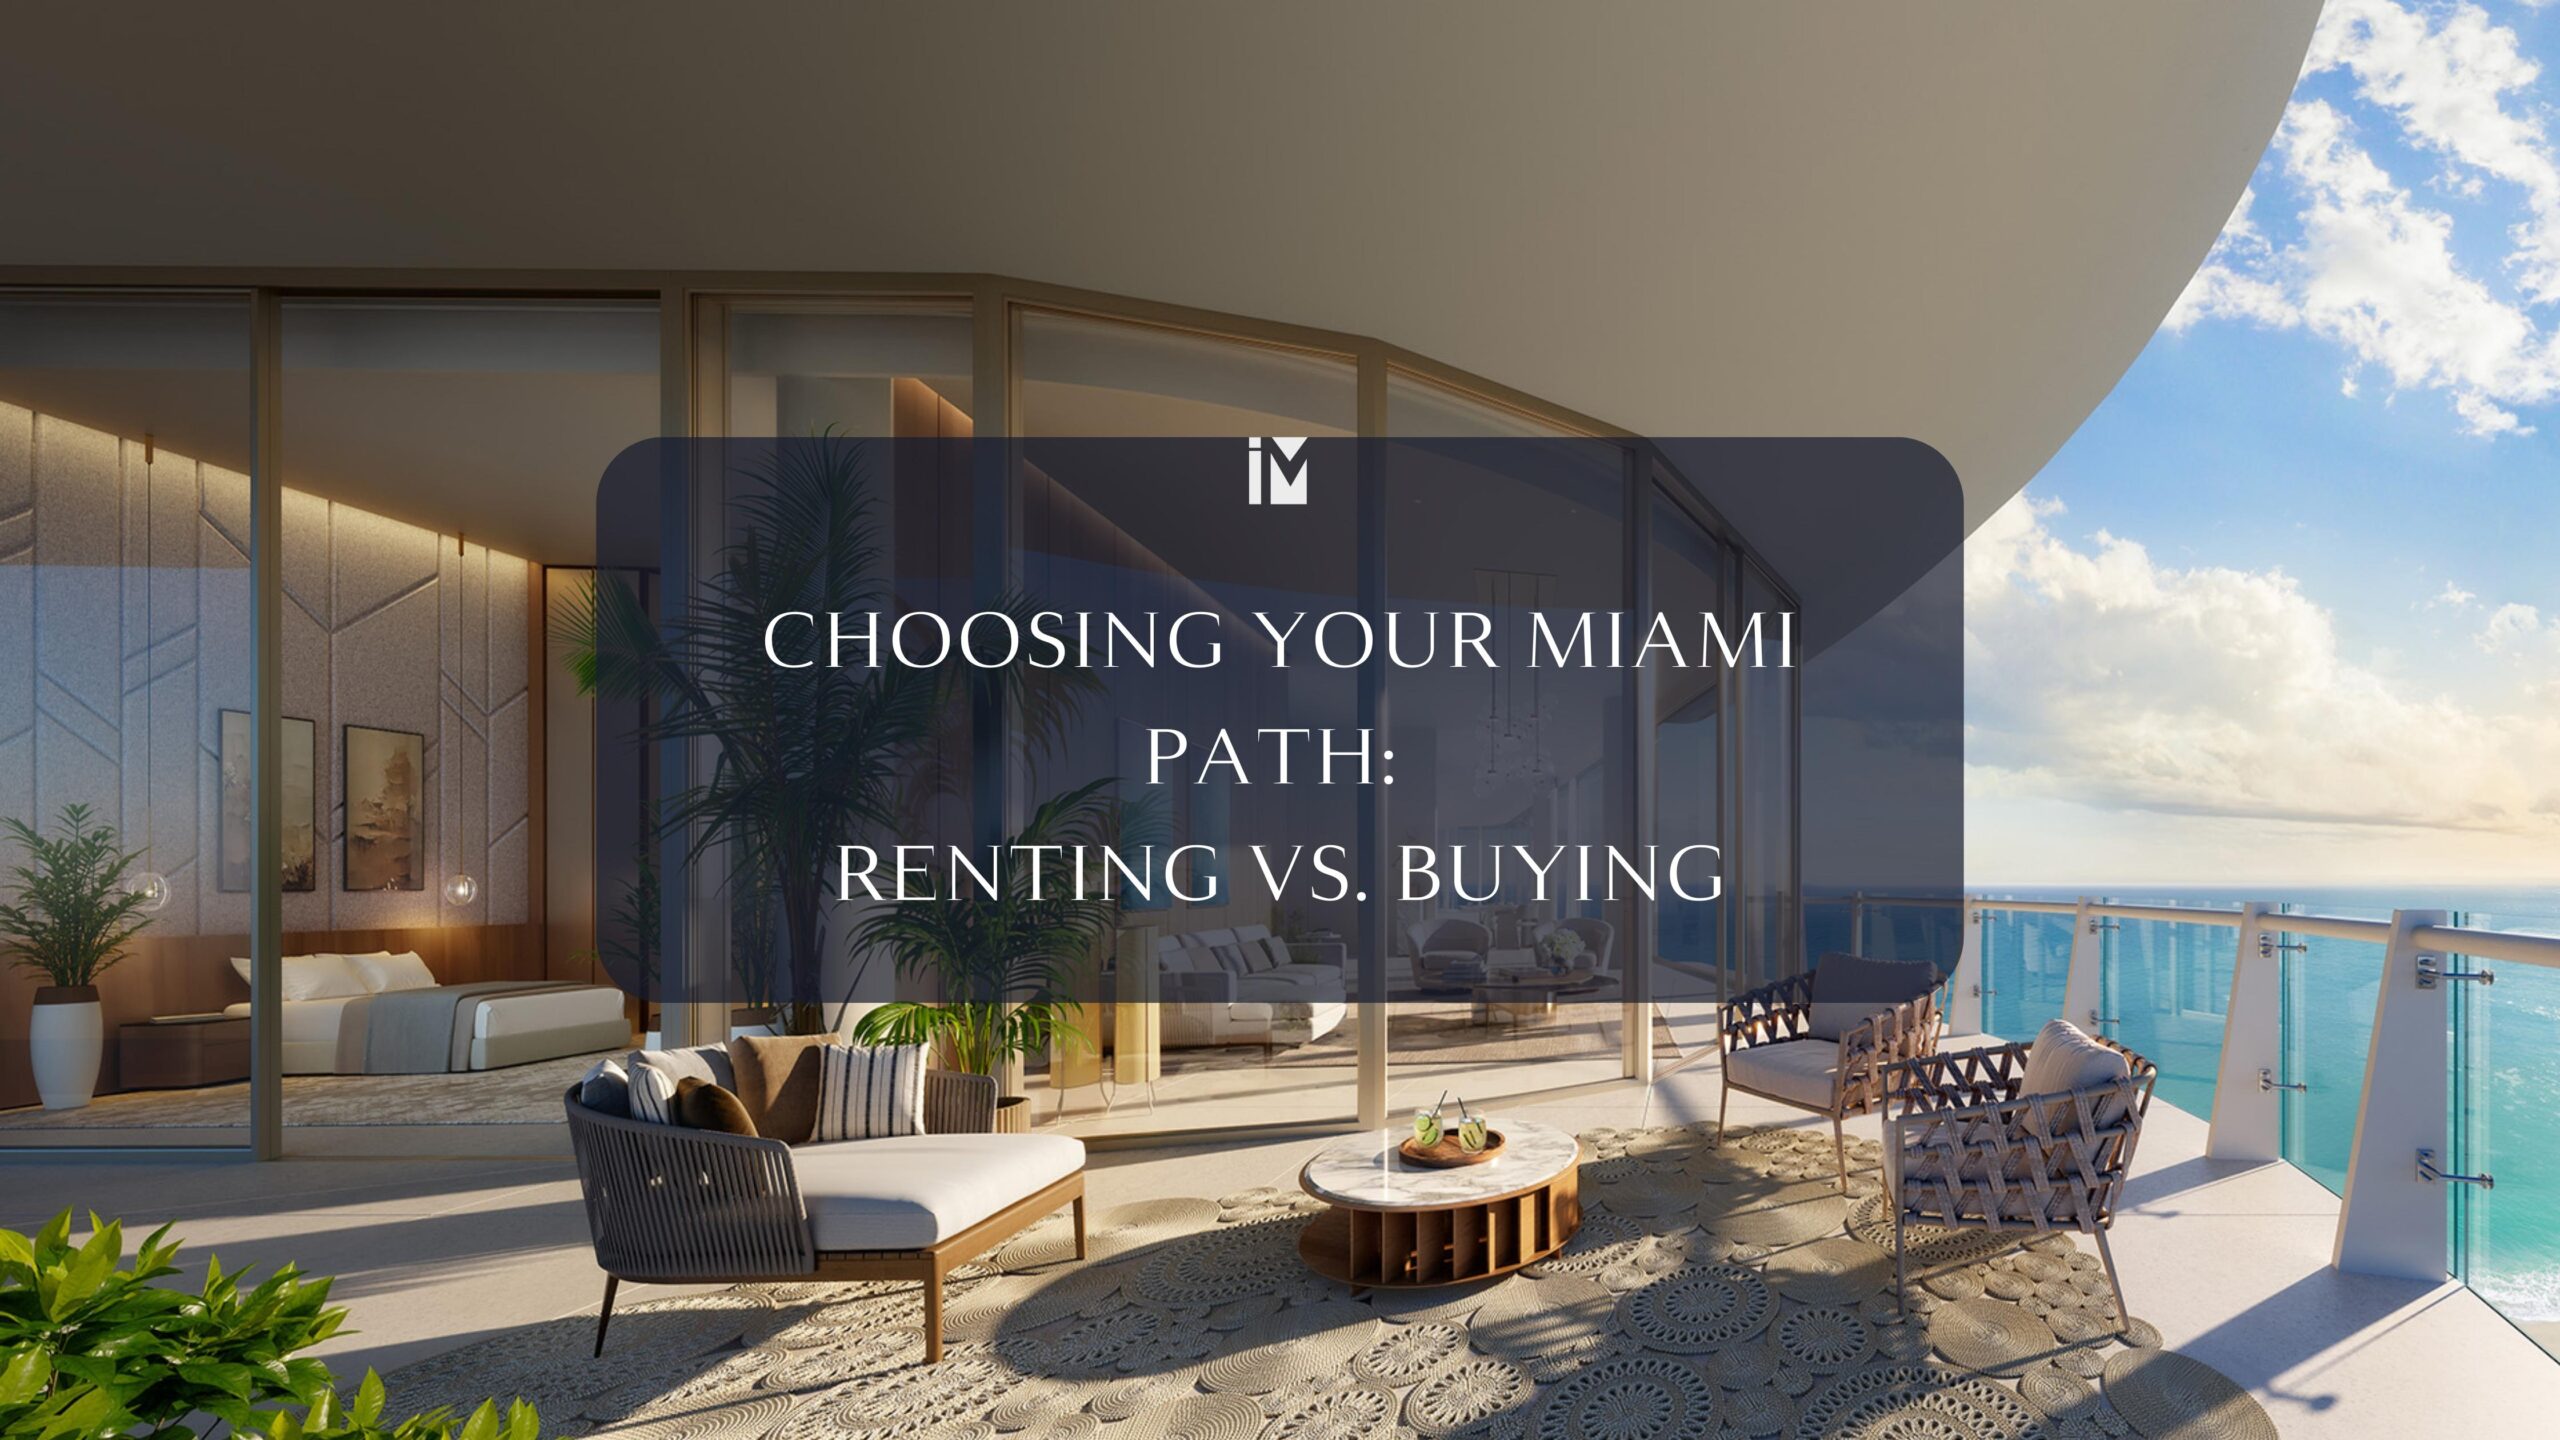 Renting vs. Buying: Making The Right Decision